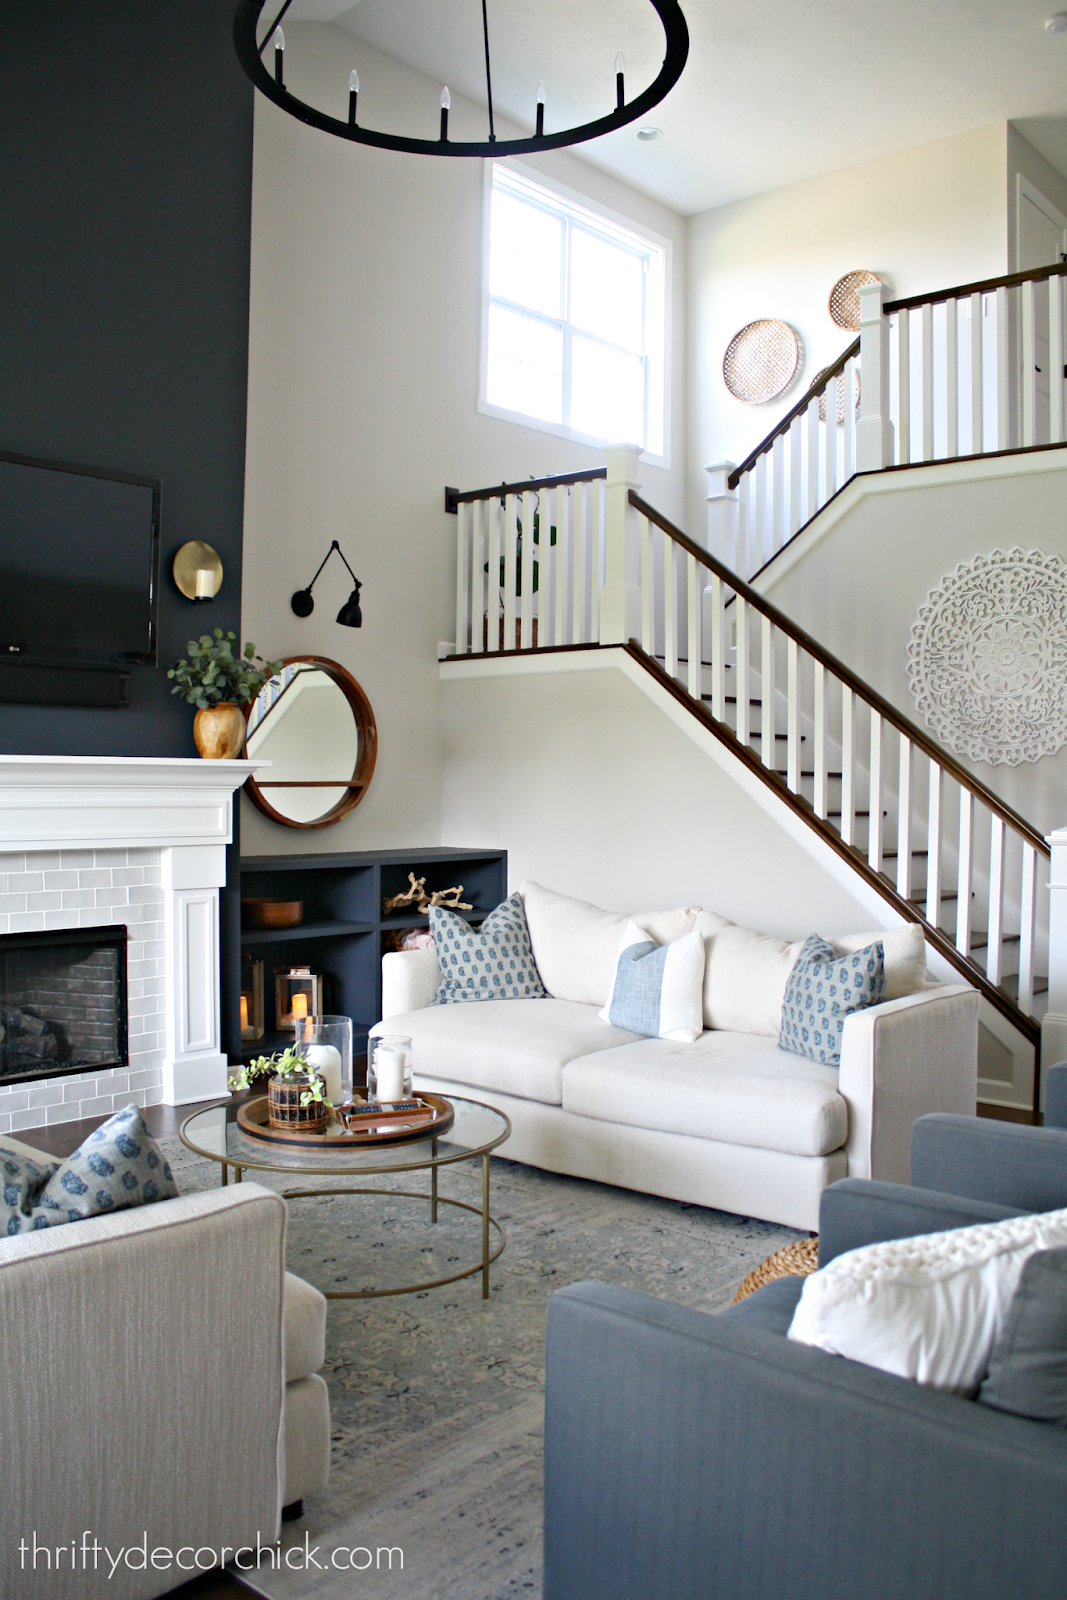 Dark blue gray color on big fireplace walls